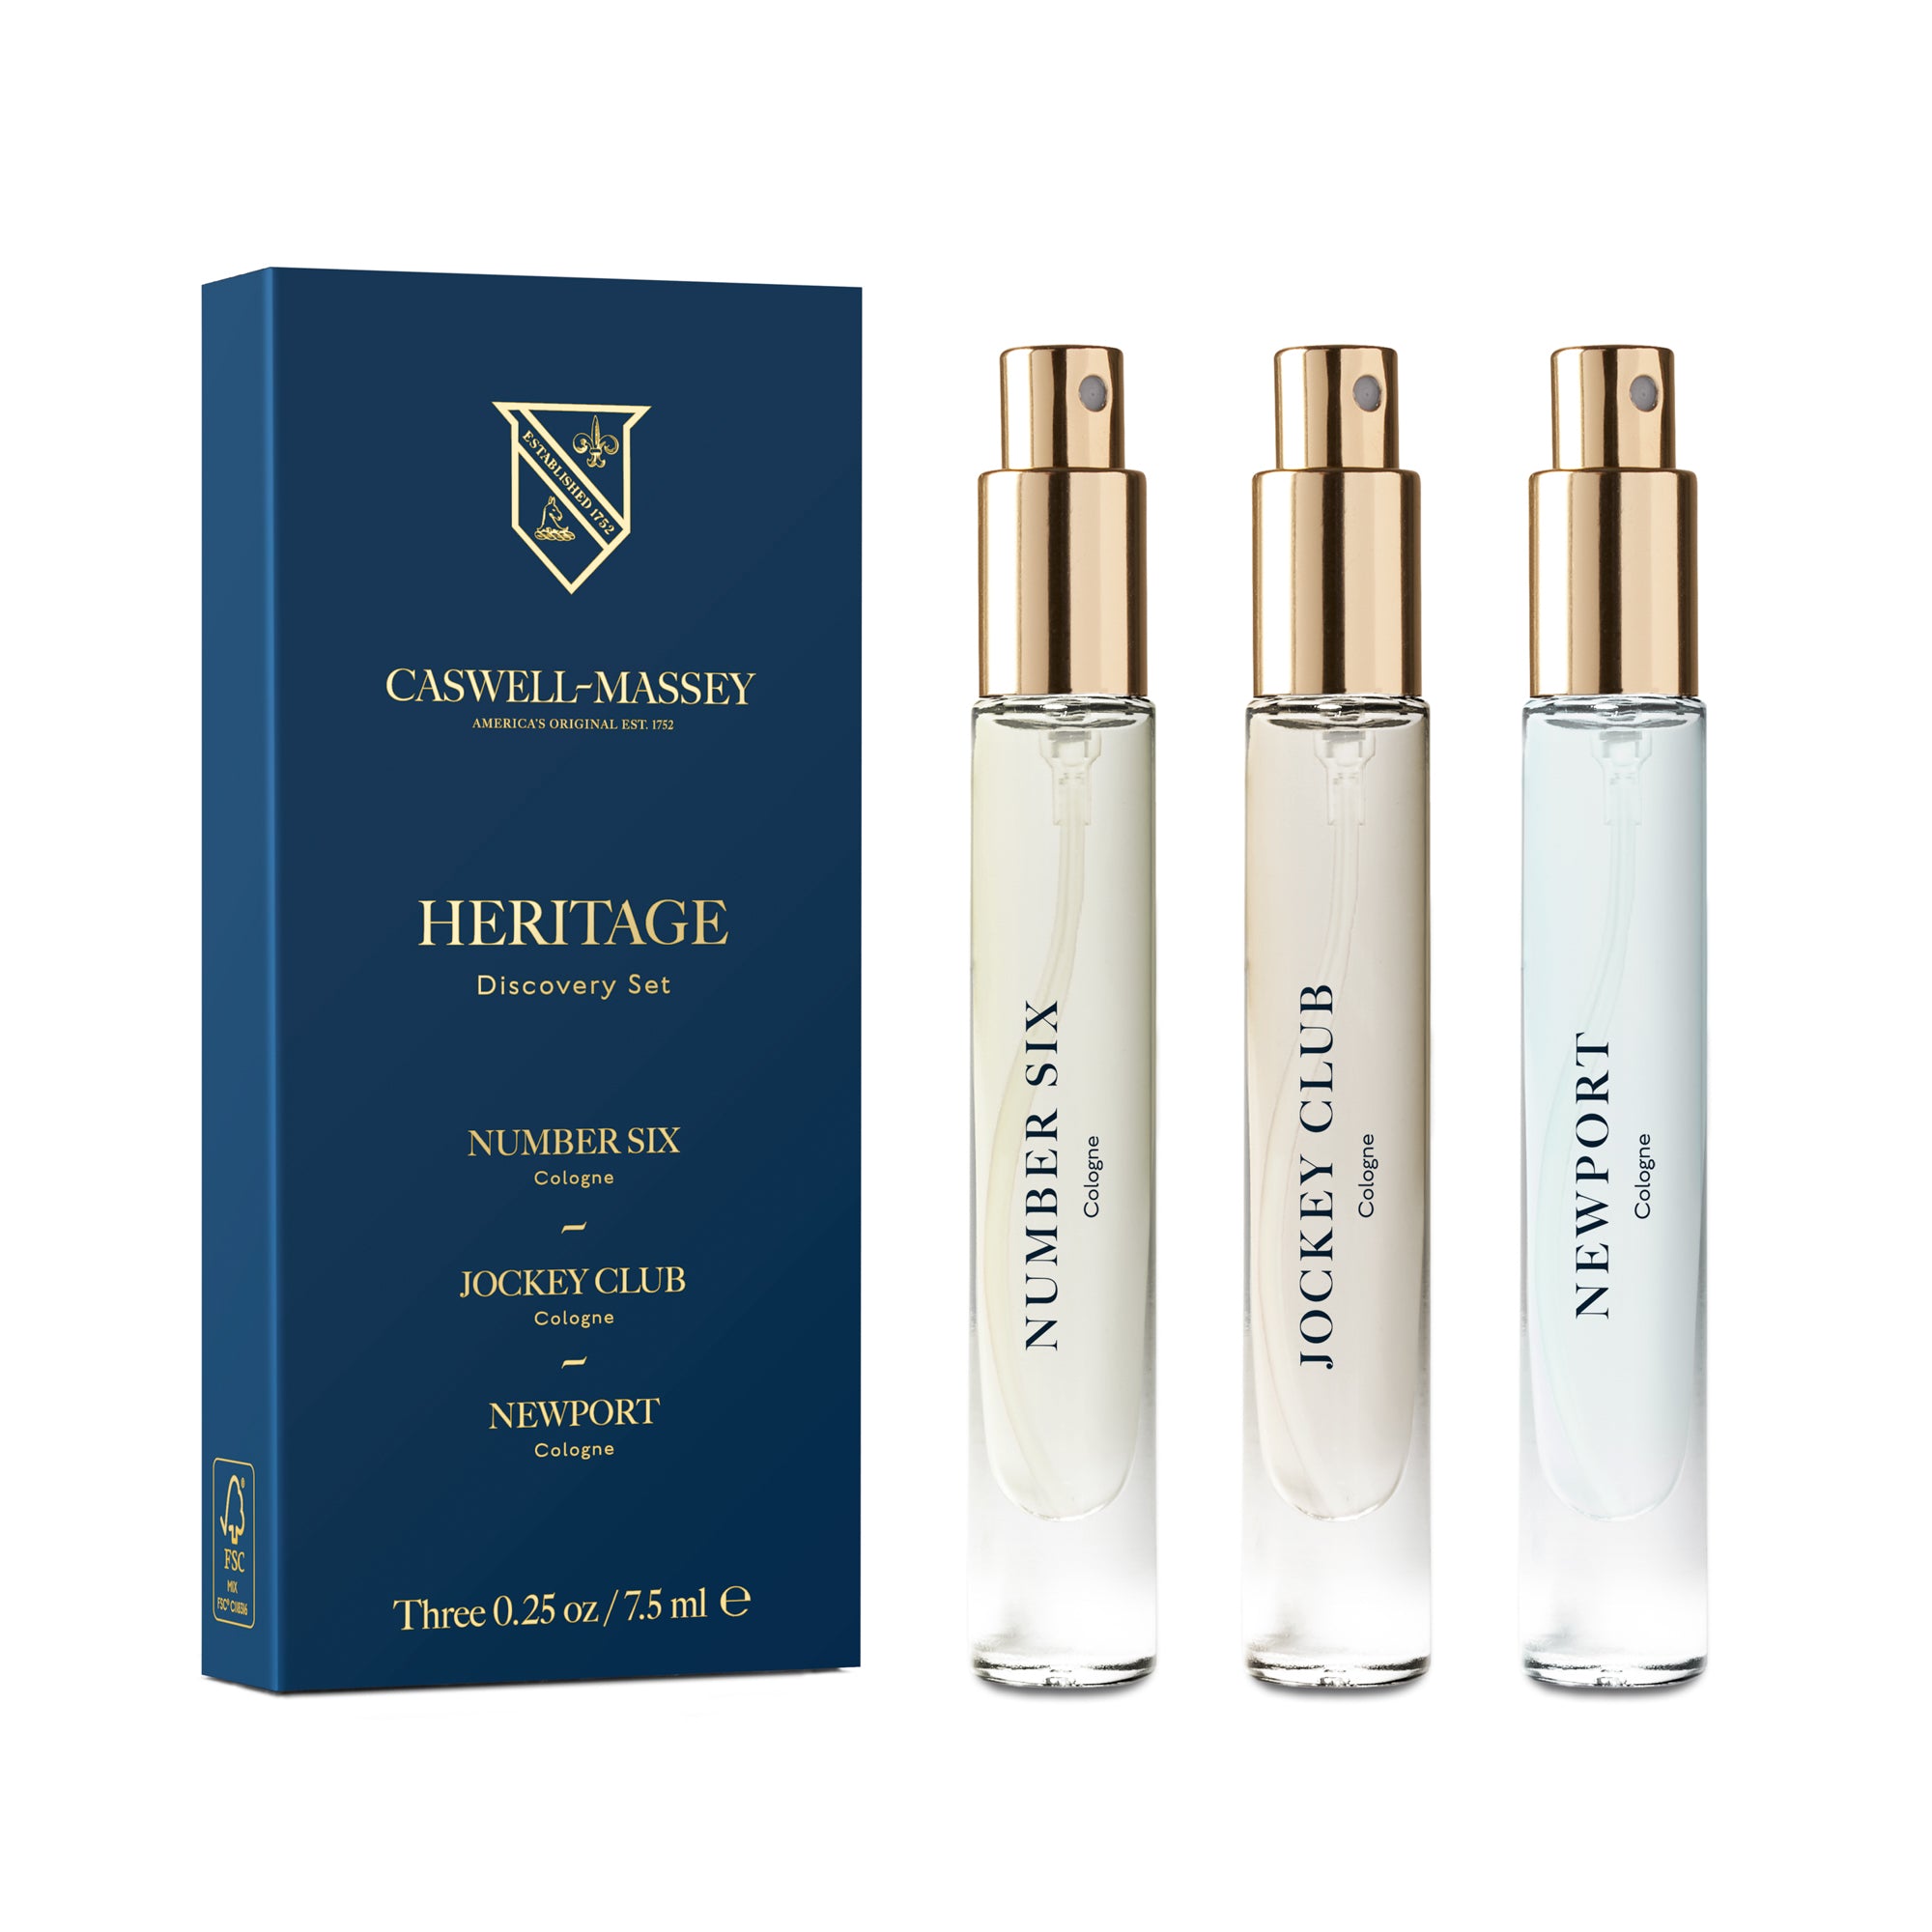 Caswell-Massey Heritage Cologne Fragrance Discovery Set